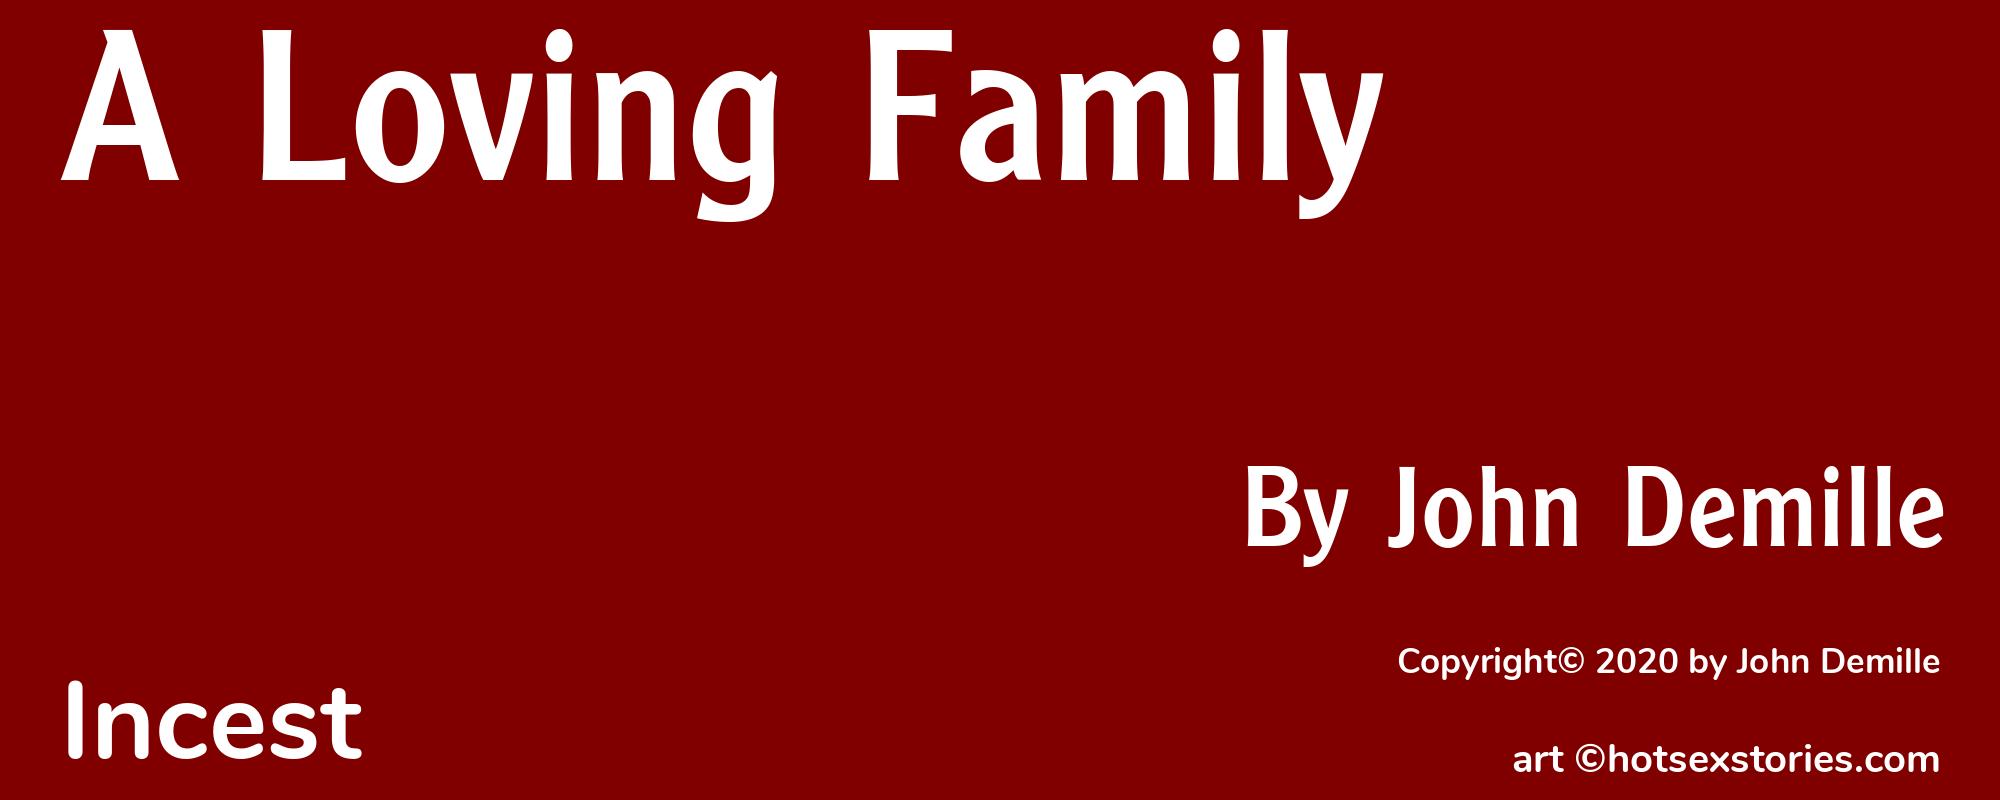 A Loving Family - Cover